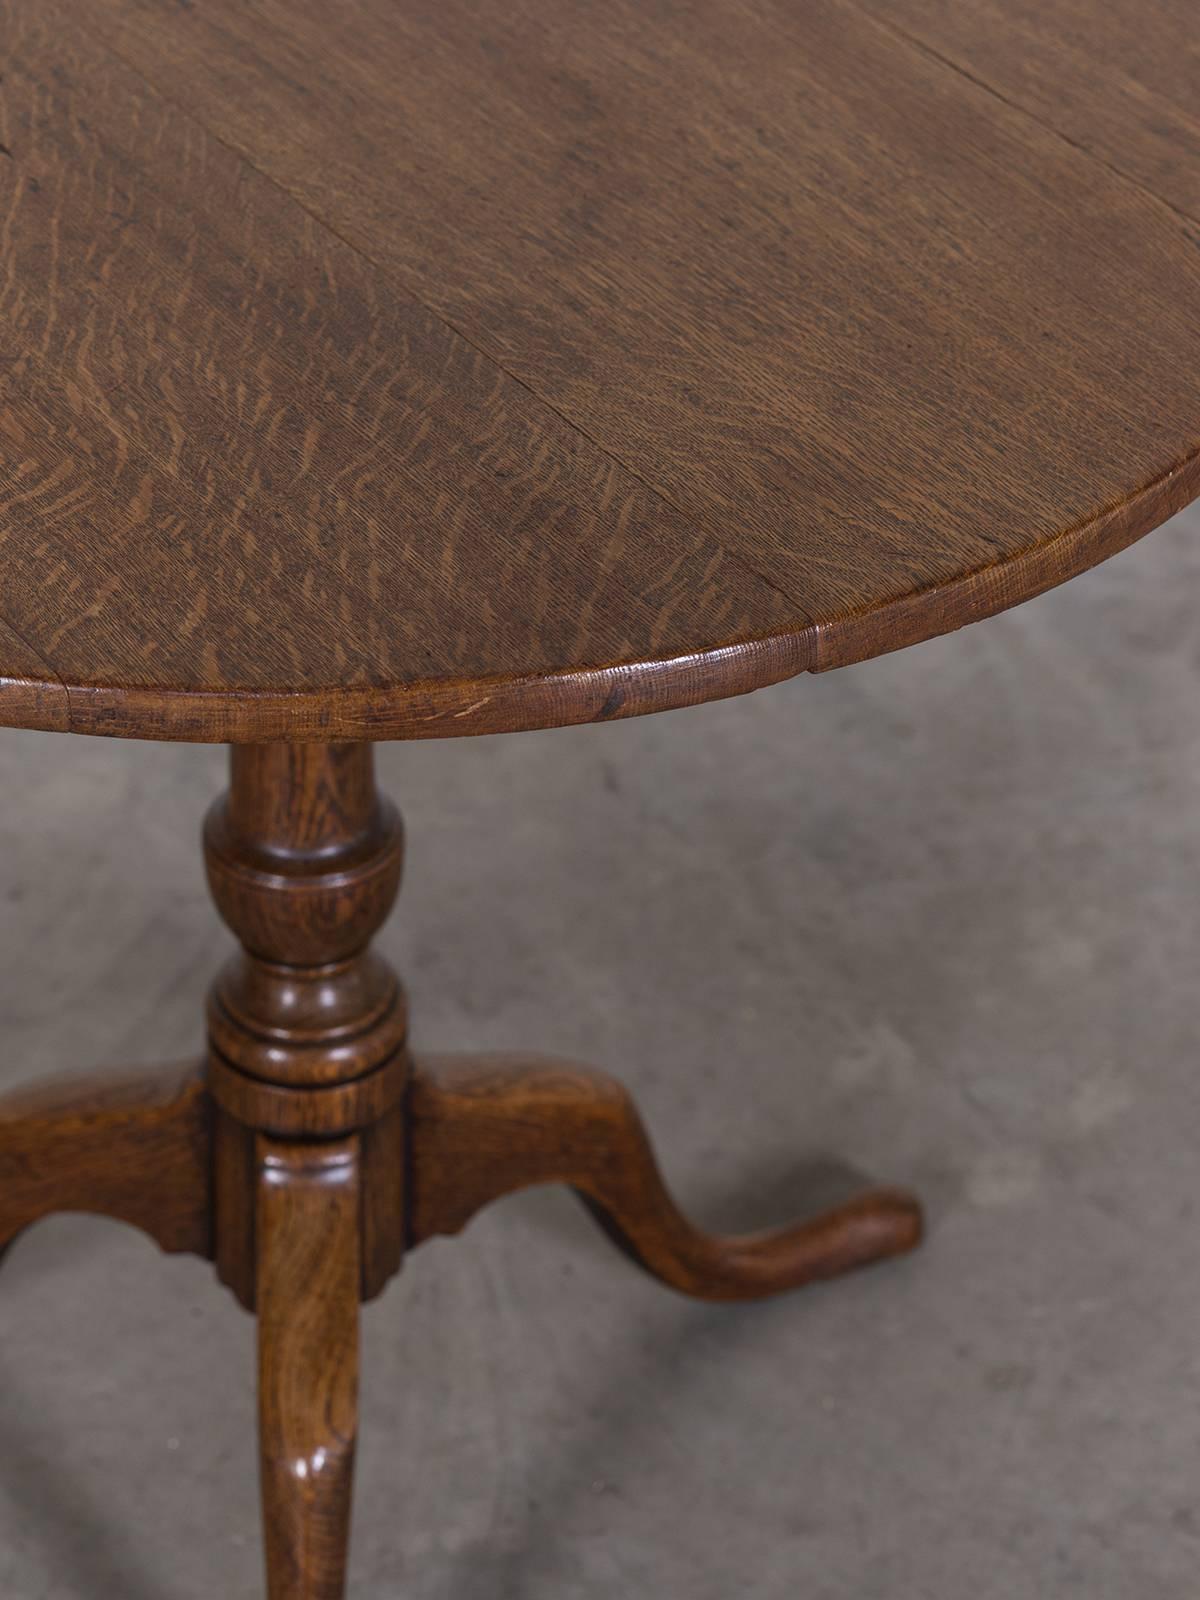 Carved George III Period Antique English Oak Tilt-Top Table, circa 1790